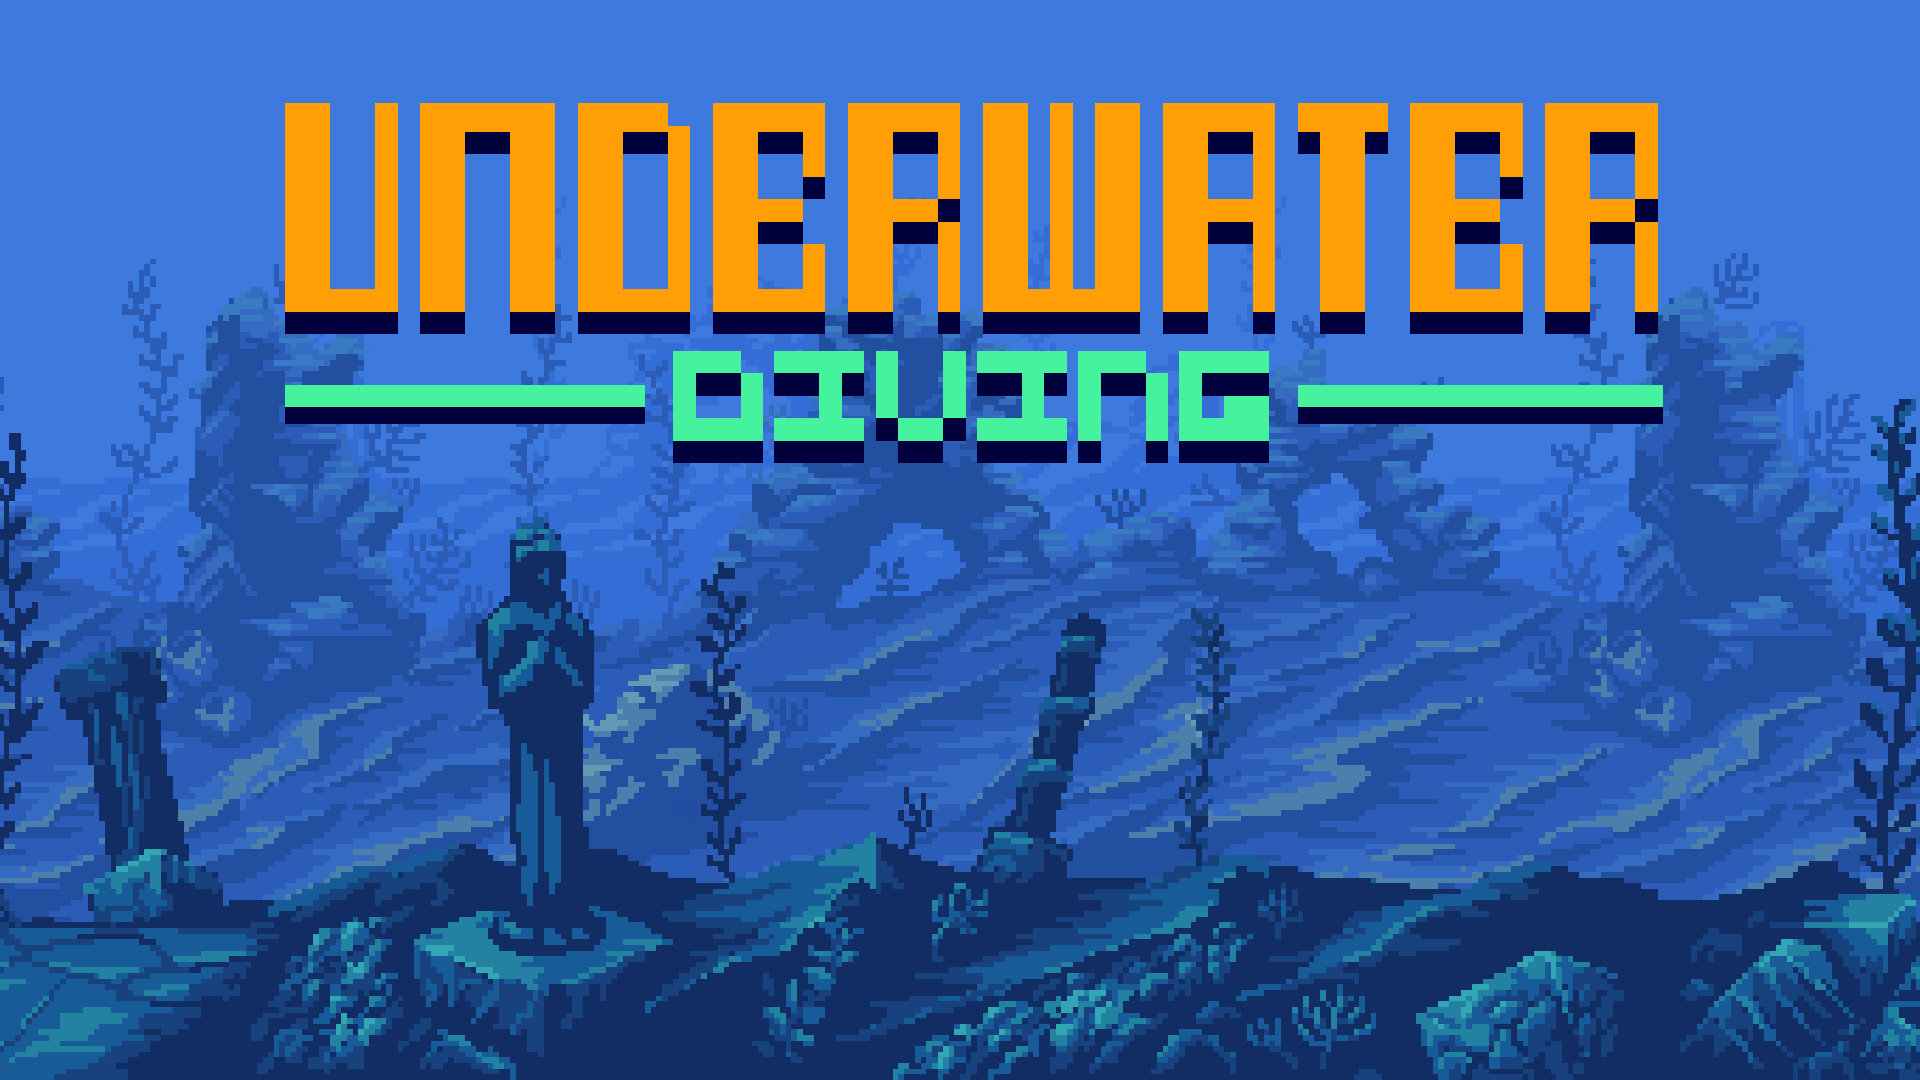 In Underwater Diving, you play as an underwater diver surrounded by aggressive fish and mines